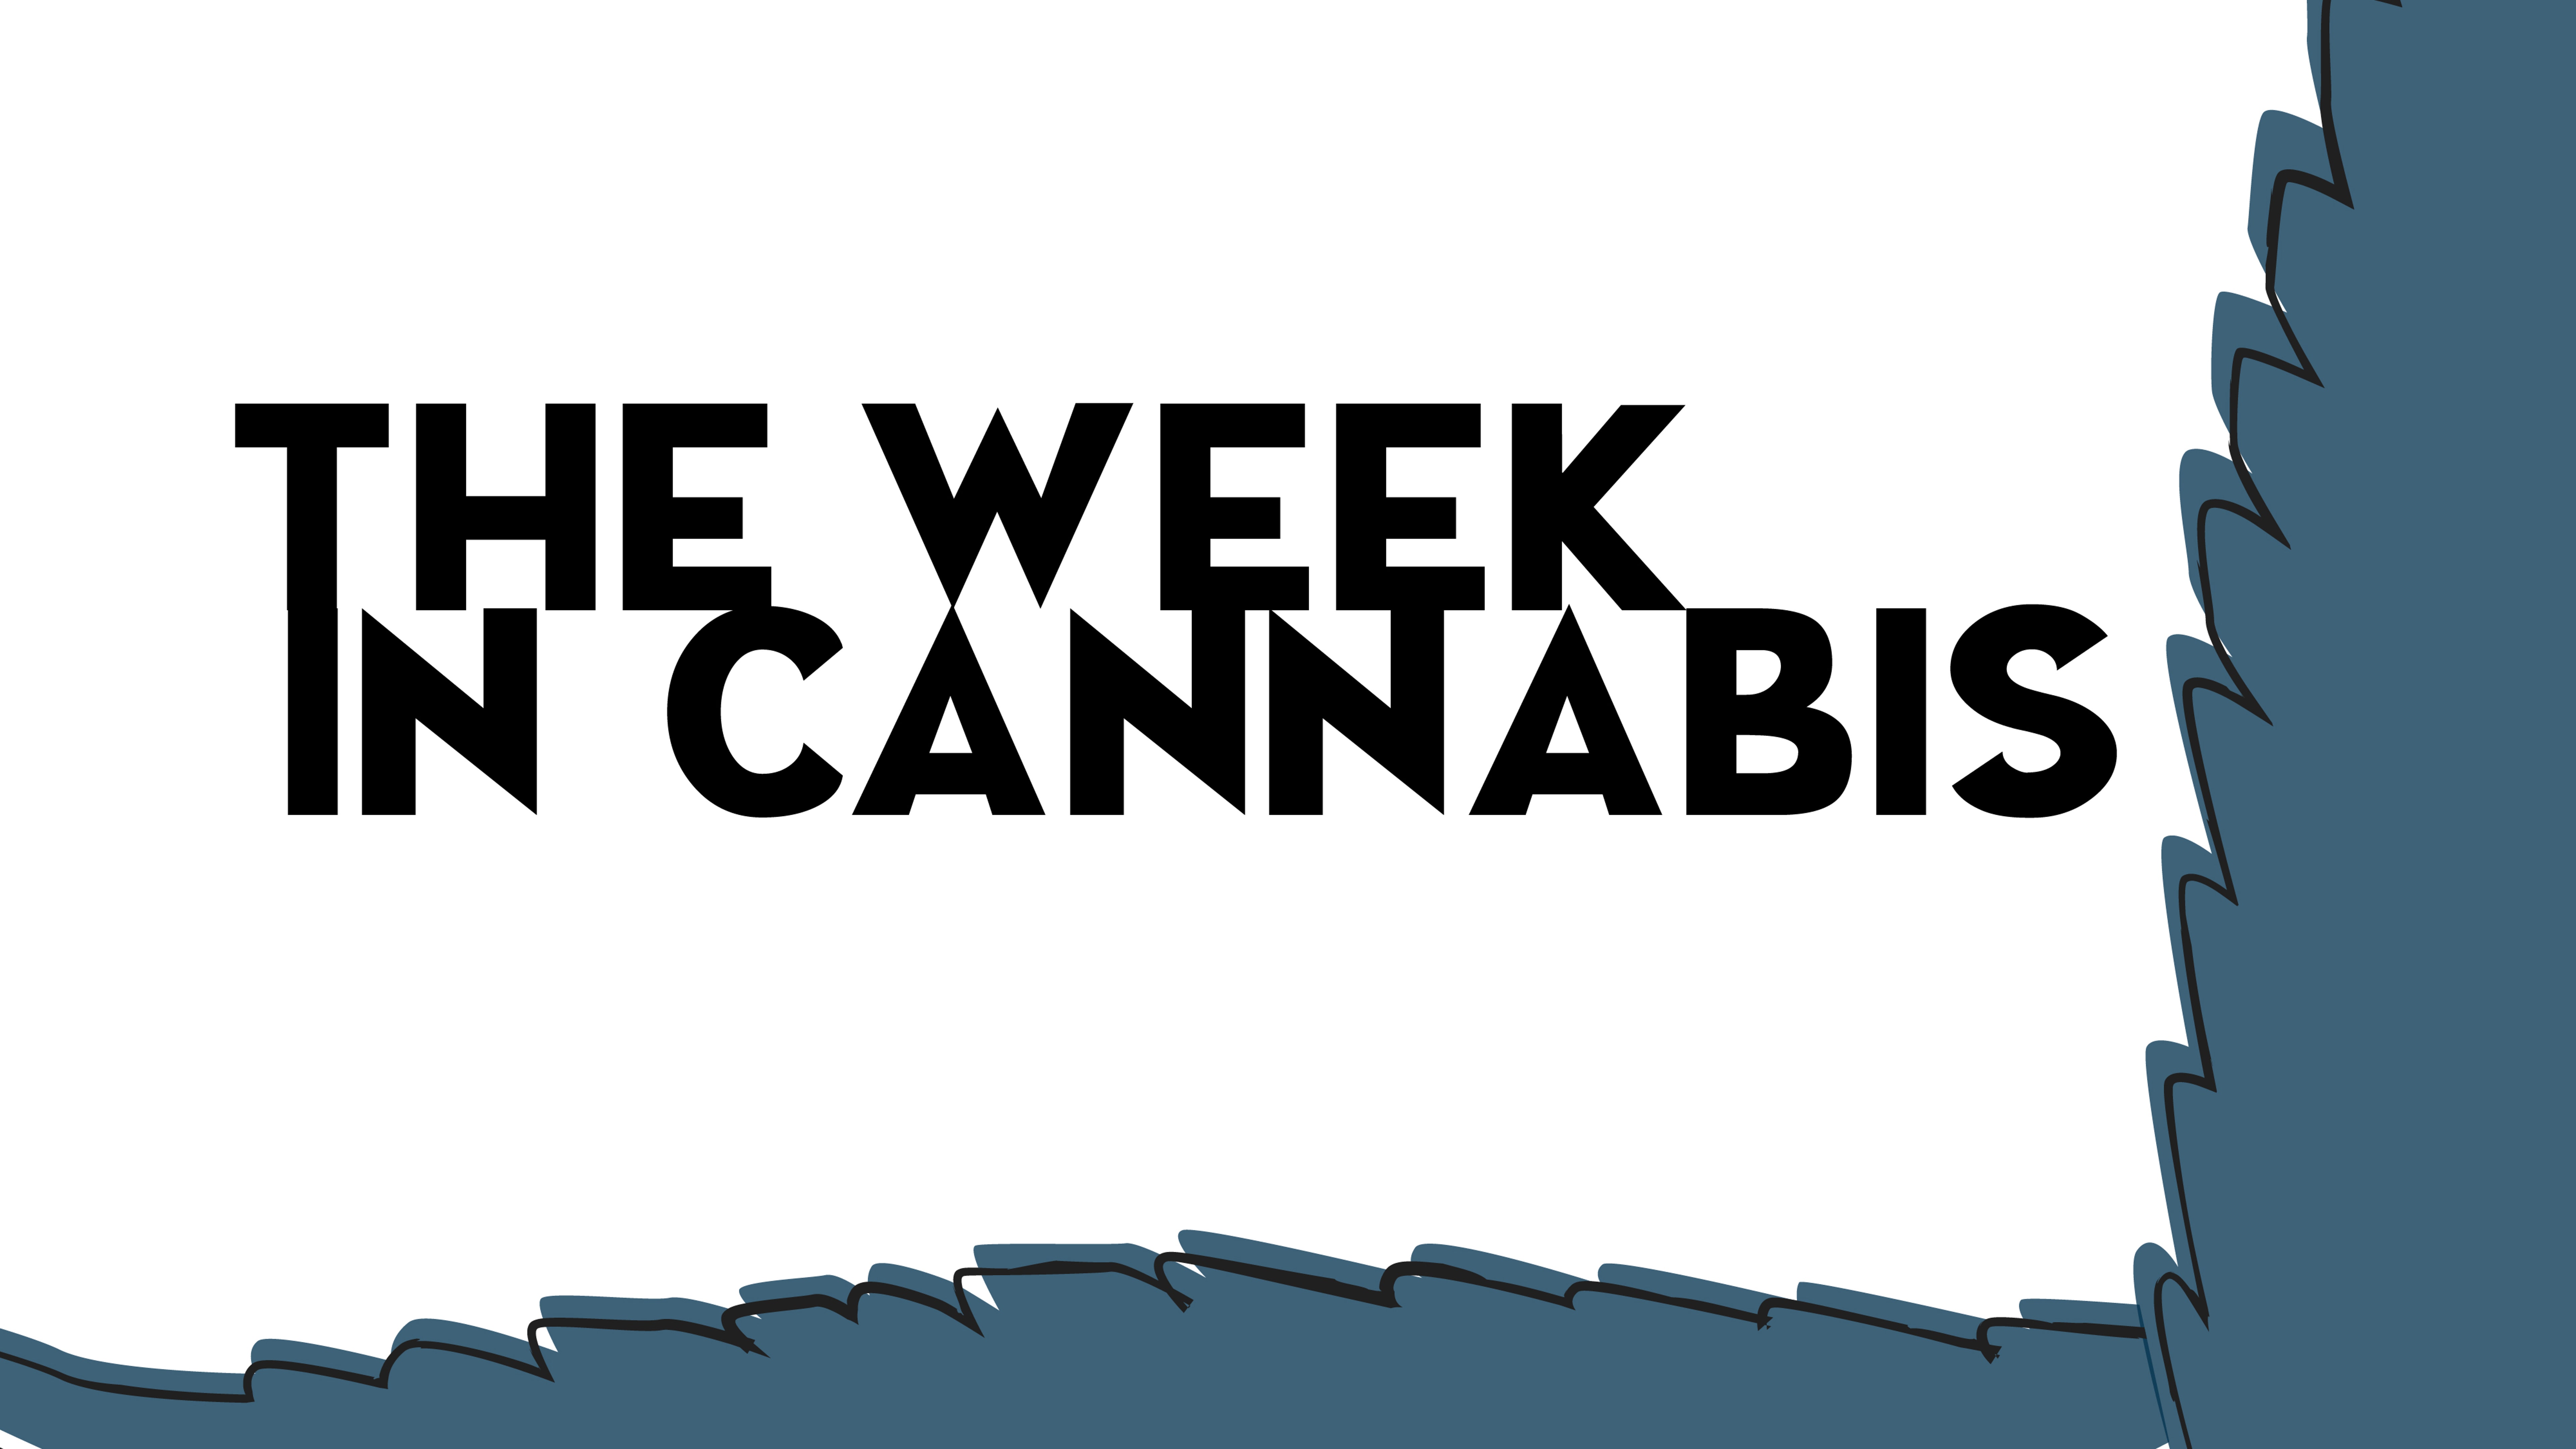 The Week In Cannabis: House Approves Banking Bill, Stocks Surge, Mississippi Legalizes Medical, M&amp;A, Hexo&#39;s Troubles And More